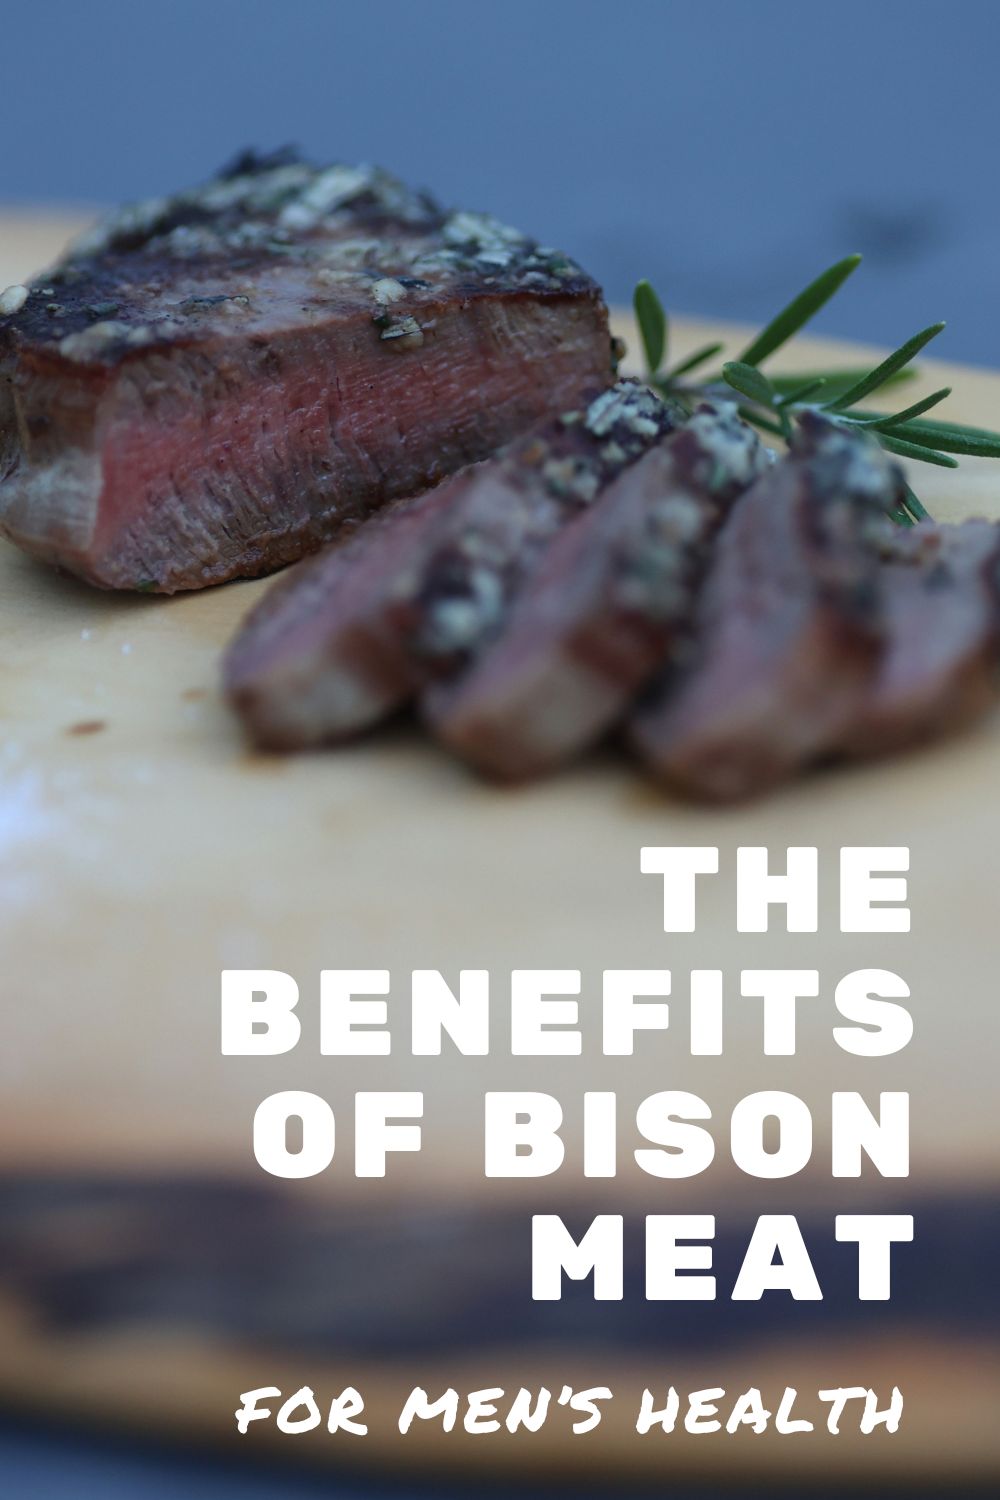 The benefits of bison meat for men's health graphic featuring a steak slicked on a wooden cutting board